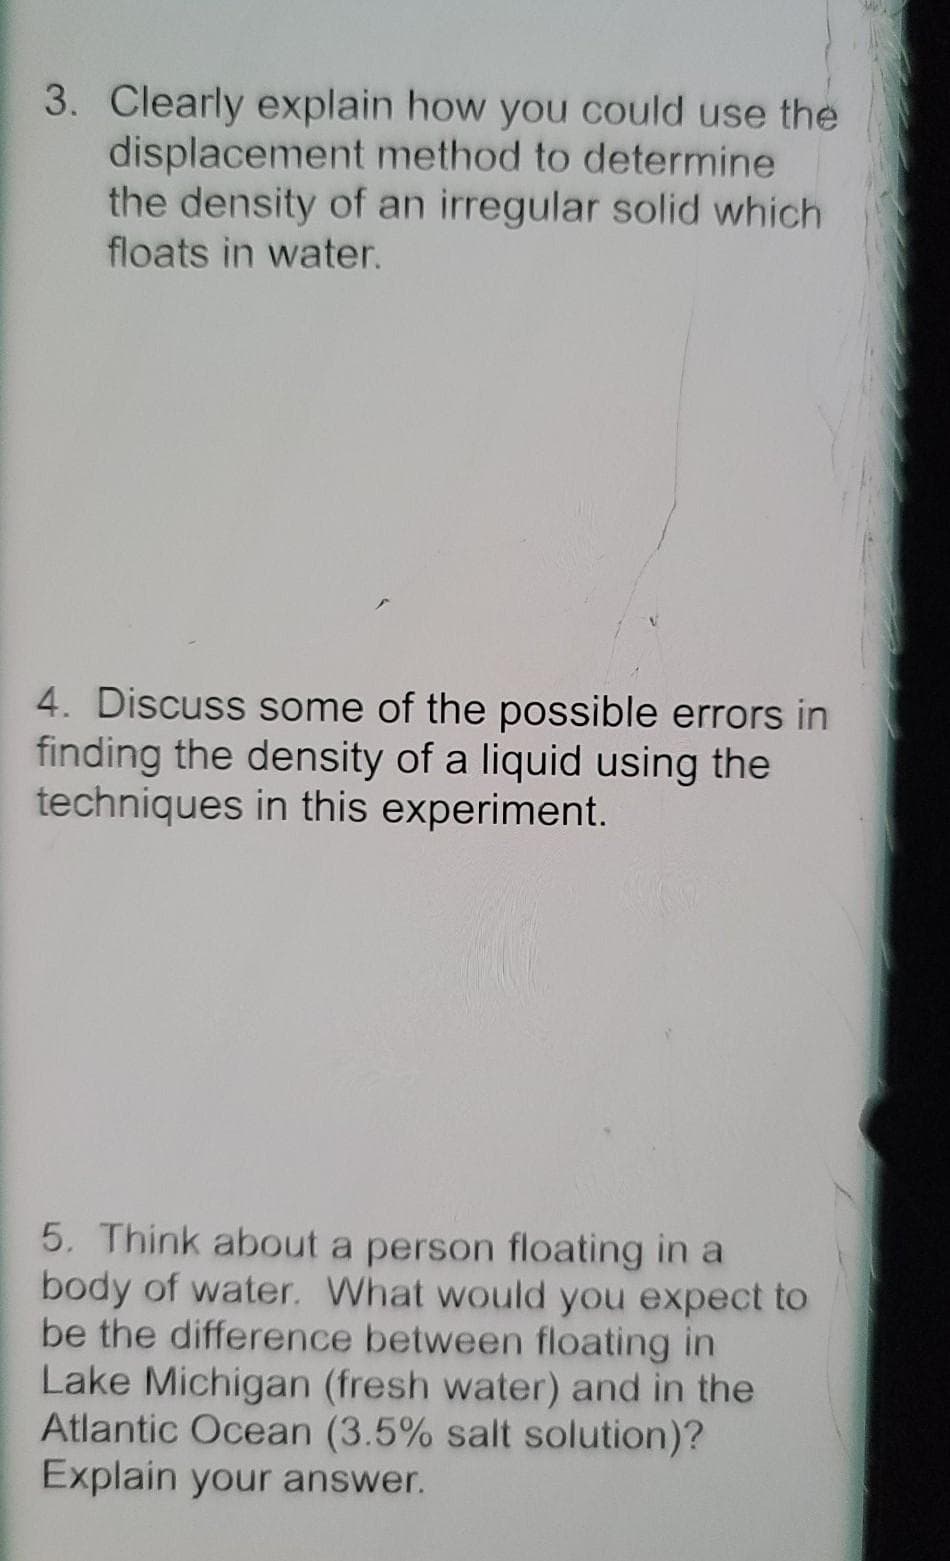 3. Clearly explain how you could use the
displacement method to determine
the density of an irregular solid which
floats in water.
4. Discuss some of the possible errors in
finding the density of a liquid using the
techniques in this experiment.
5. Think about a person floating in a
body of water. What would you expect to
be the difference between floating in
Lake Michigan (fresh water) and in the
Atlantic Ocean (3.5% salt solution)?
Explain your answer.
